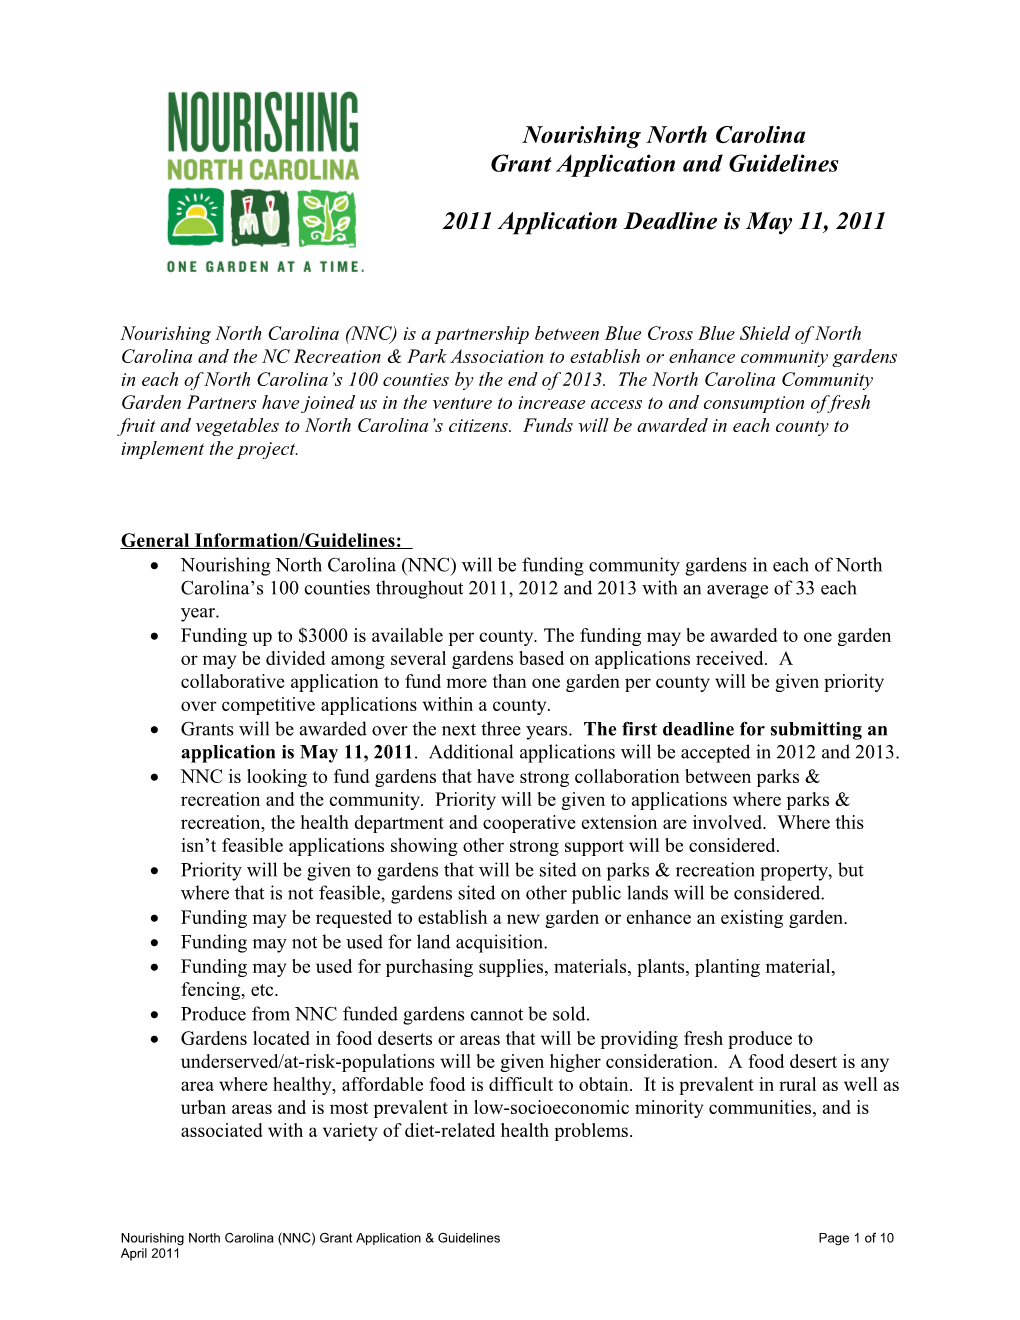 Nourishing NC Grant Application and Guidelines s3